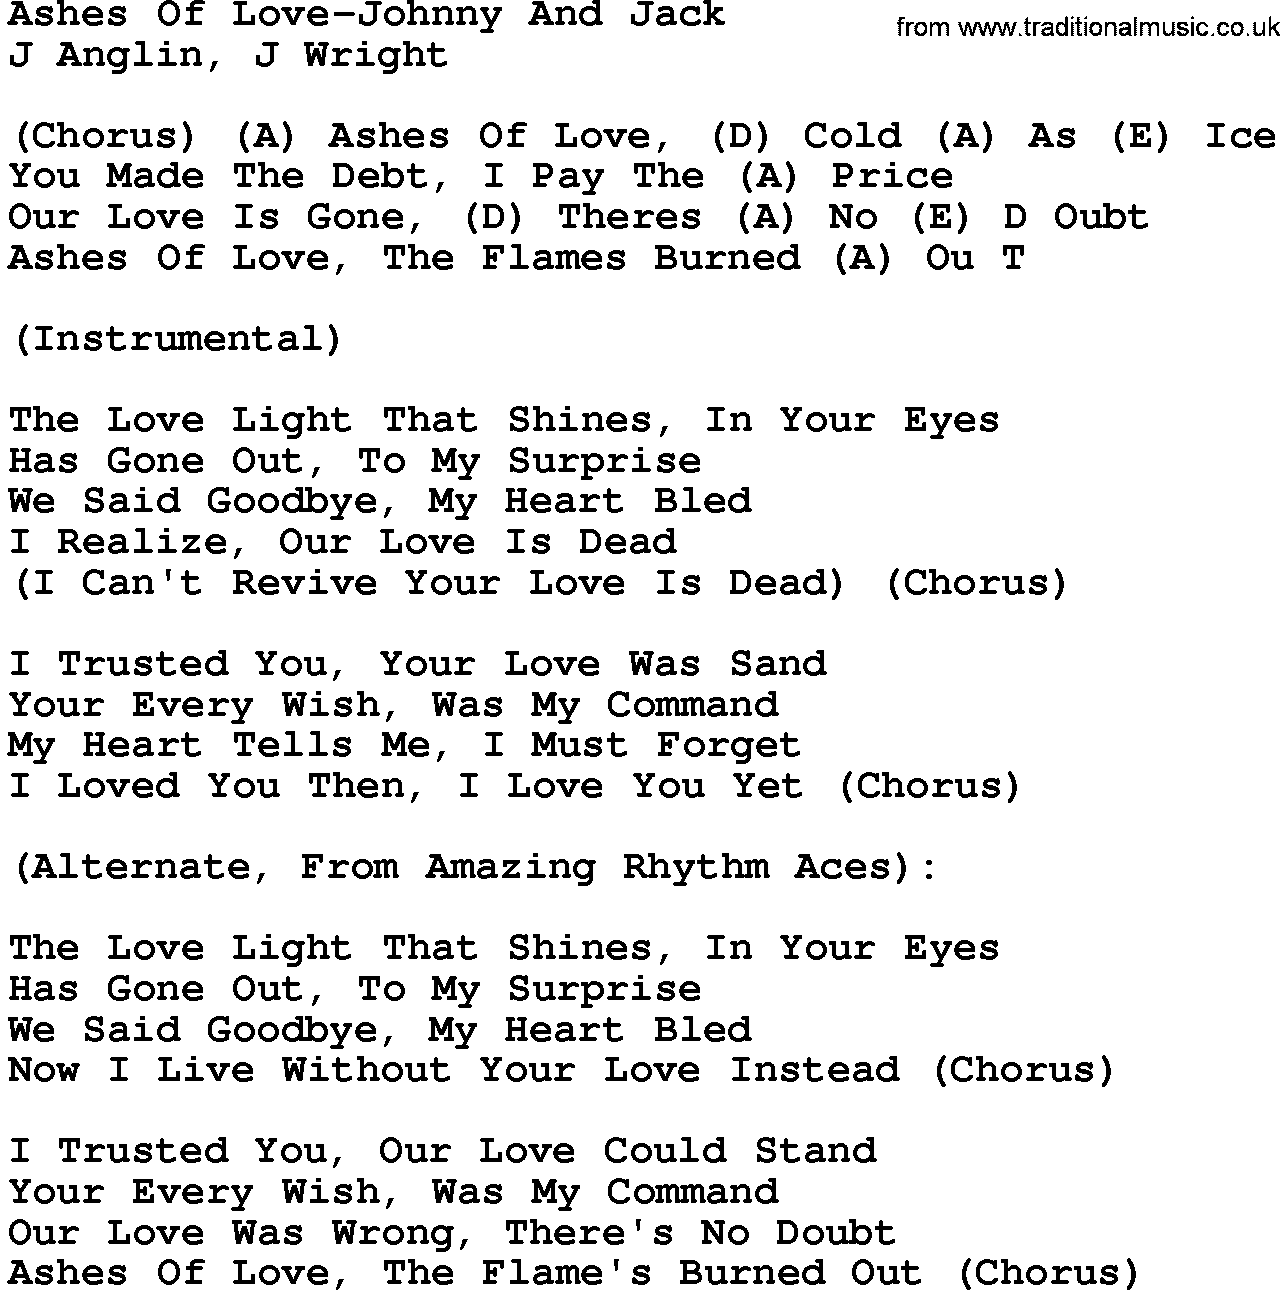 Country music song: Ashes Of Love-Johnny And Jack lyrics and chords